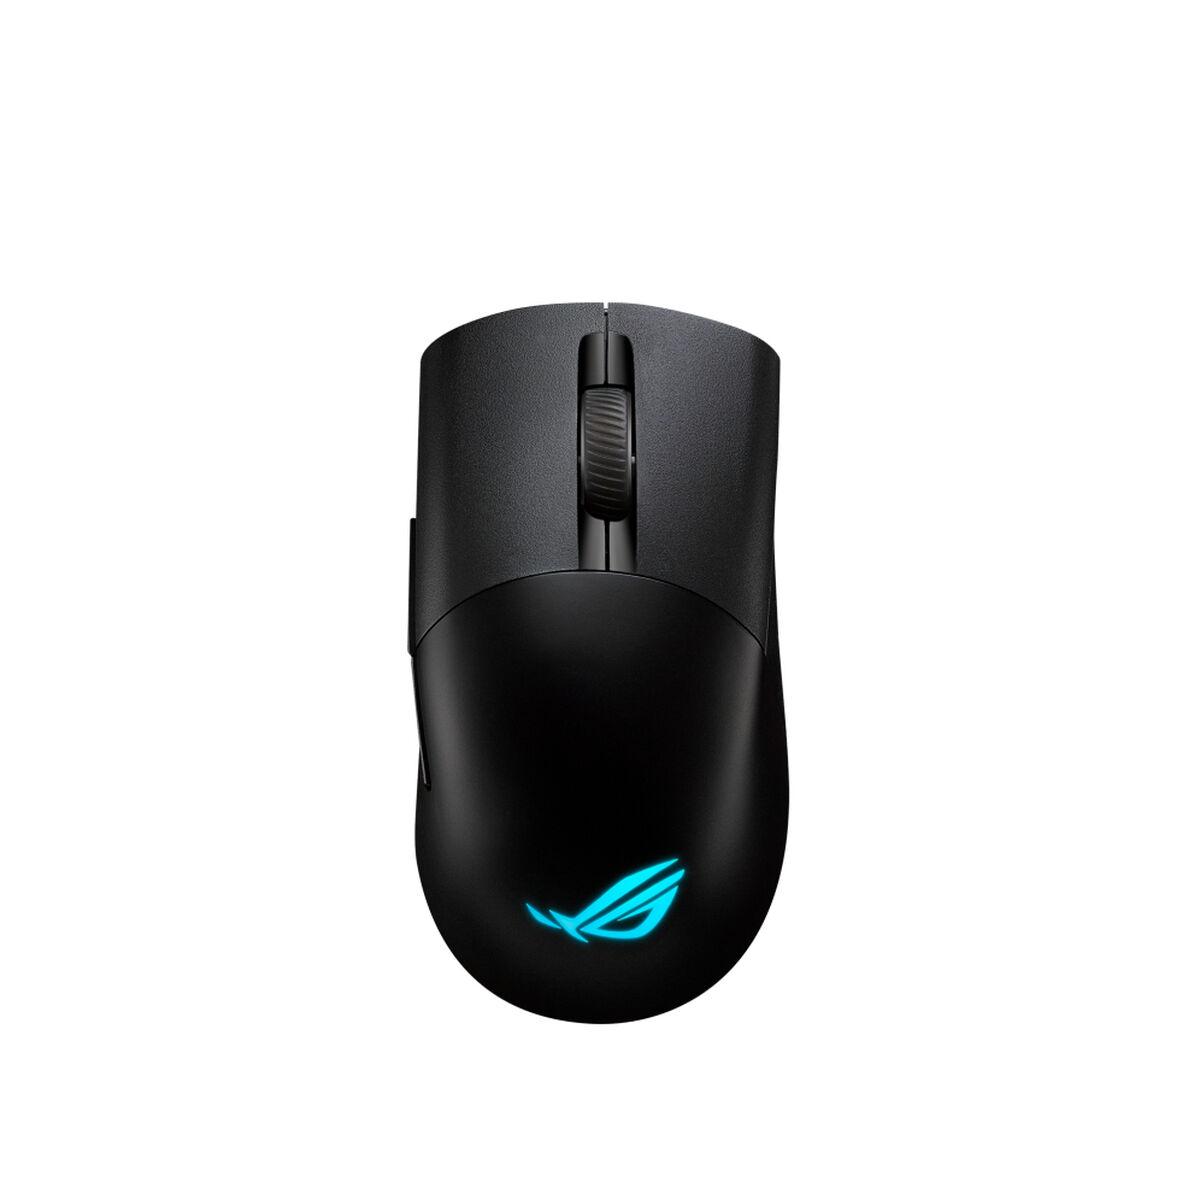 Se ASUS ROG KERIS Wireless AimPoint Black Gaming Mouse hos Boligcenter.dk